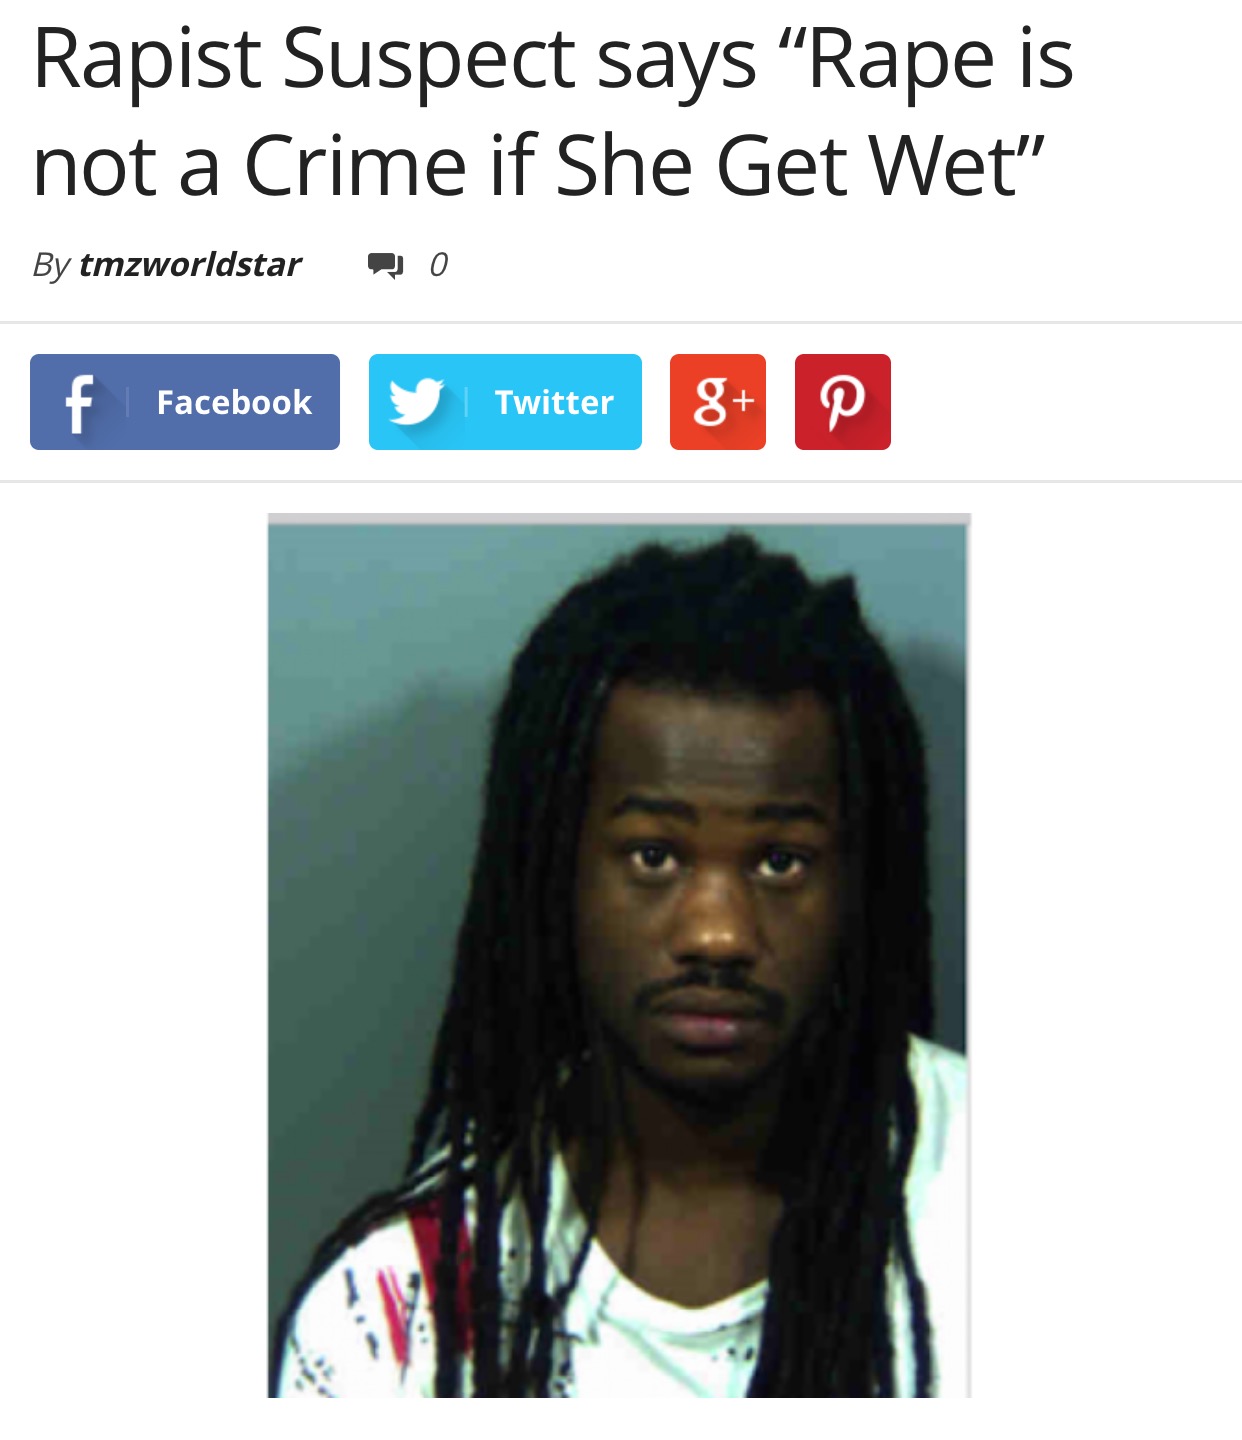 hairstyle - Rapist Suspect says Rape is not a Crime if She Get Wet" By tmzworldstar o f Facebook Twitter 8 P